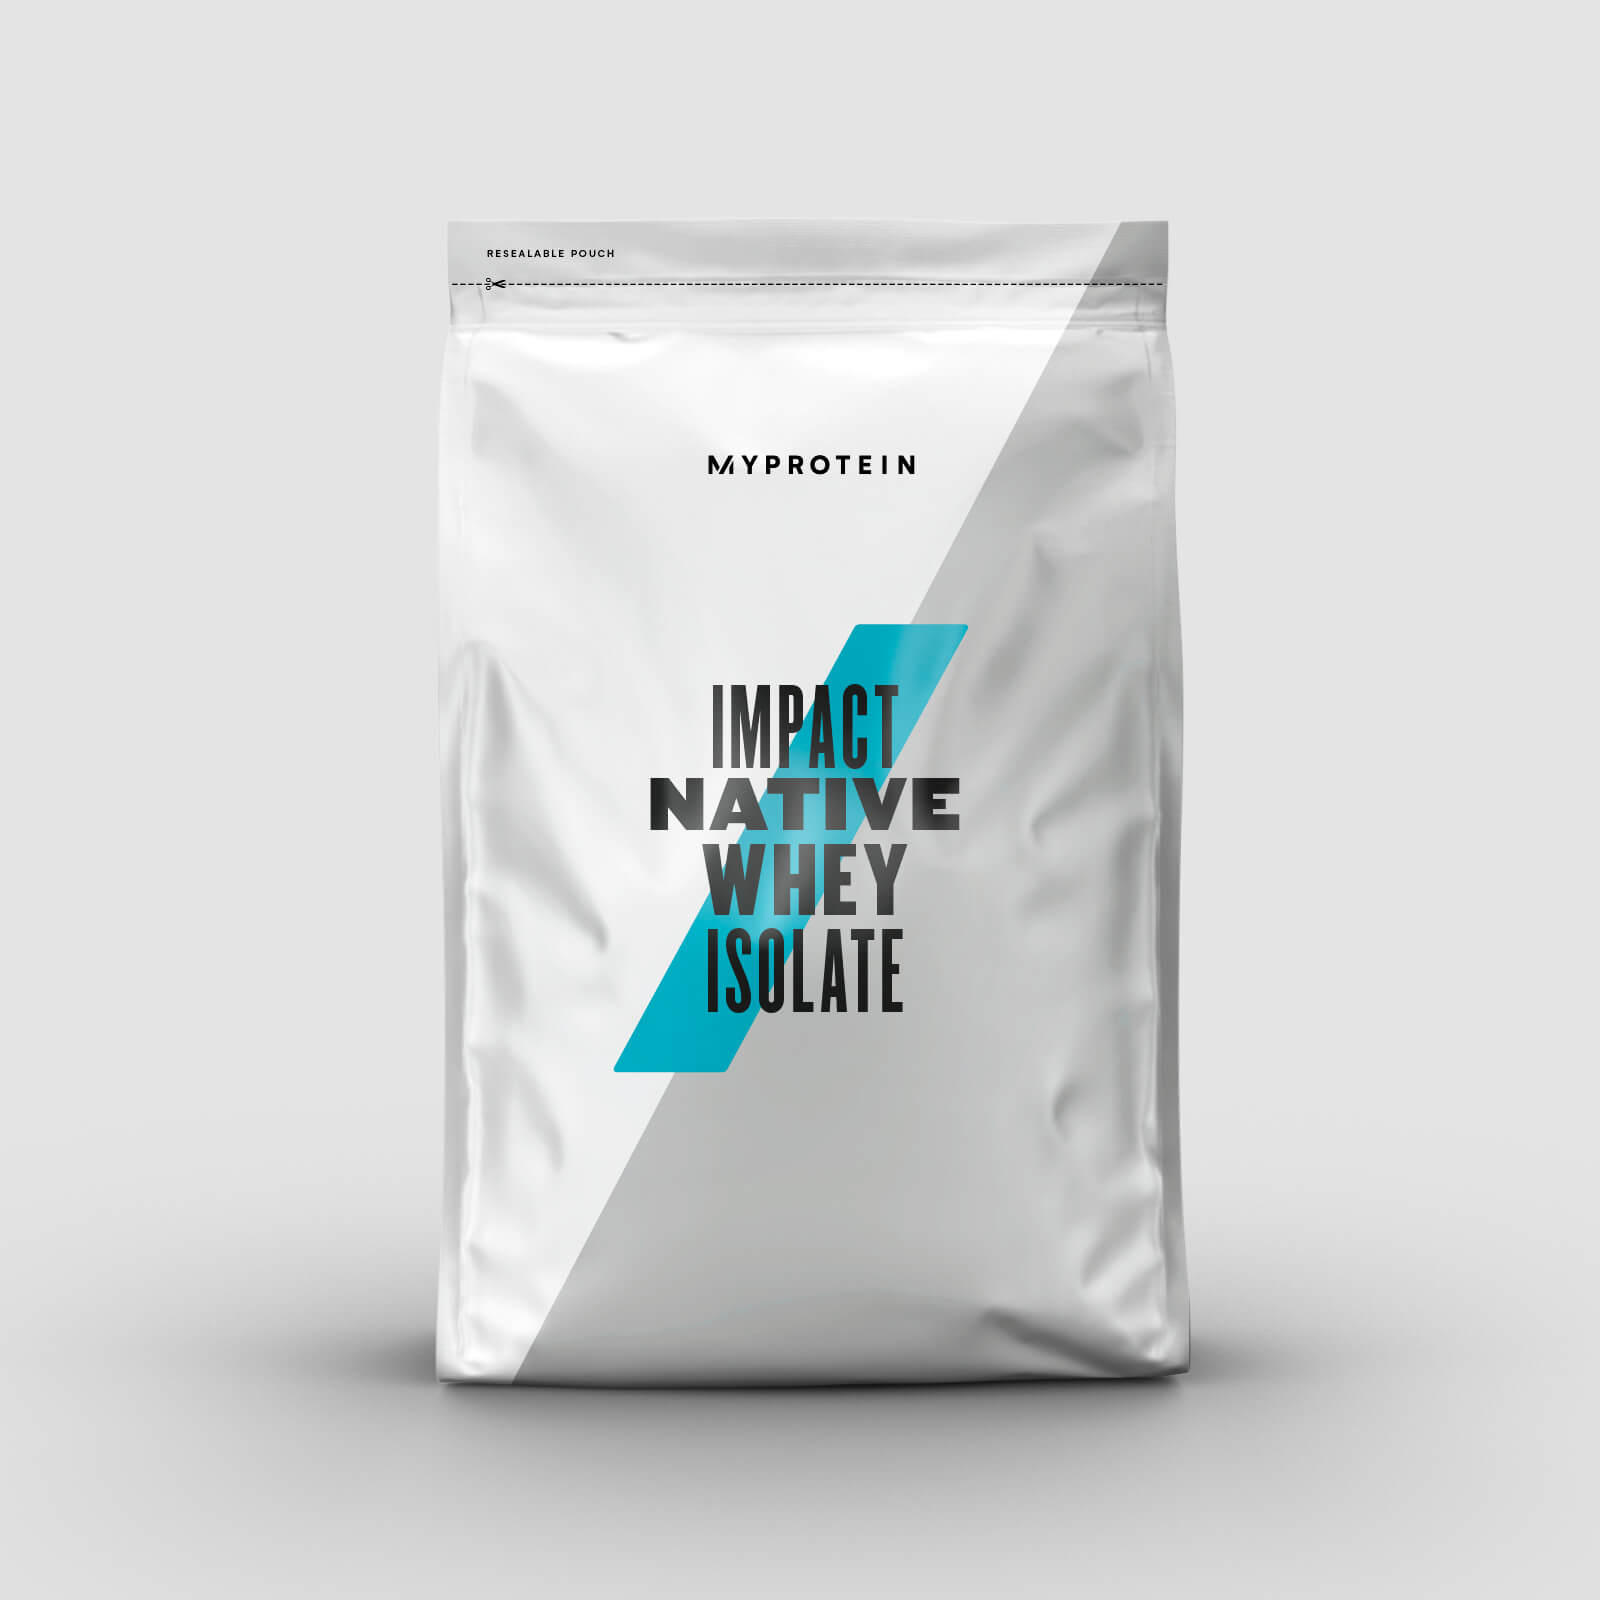 Myprotein Impact Native Whey Isolate - 1kg - Ny - Natural Chocolate